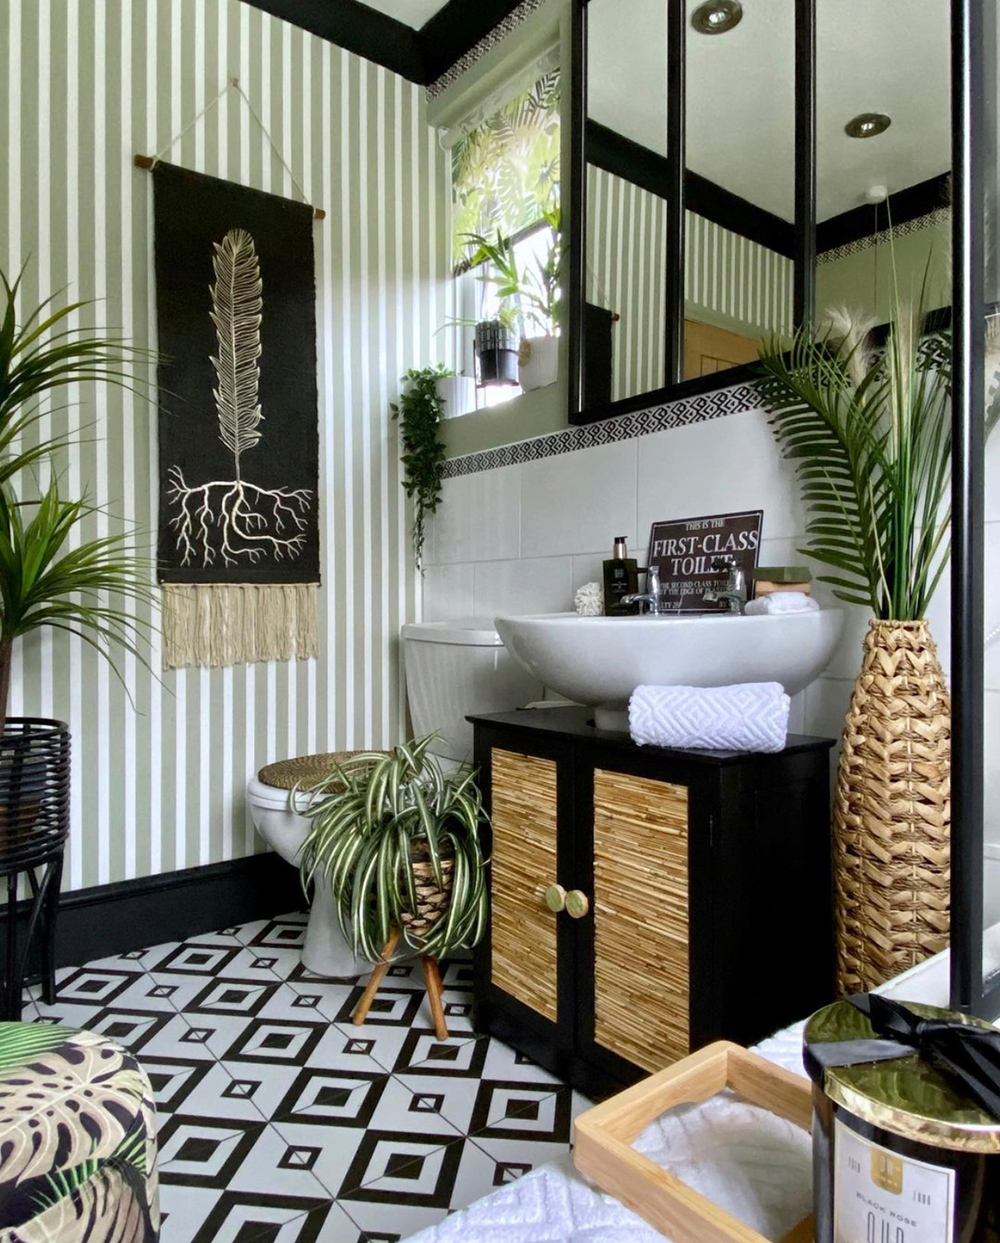 Green and black bathroom with monochrome patterned vinyl floor and lush house plants